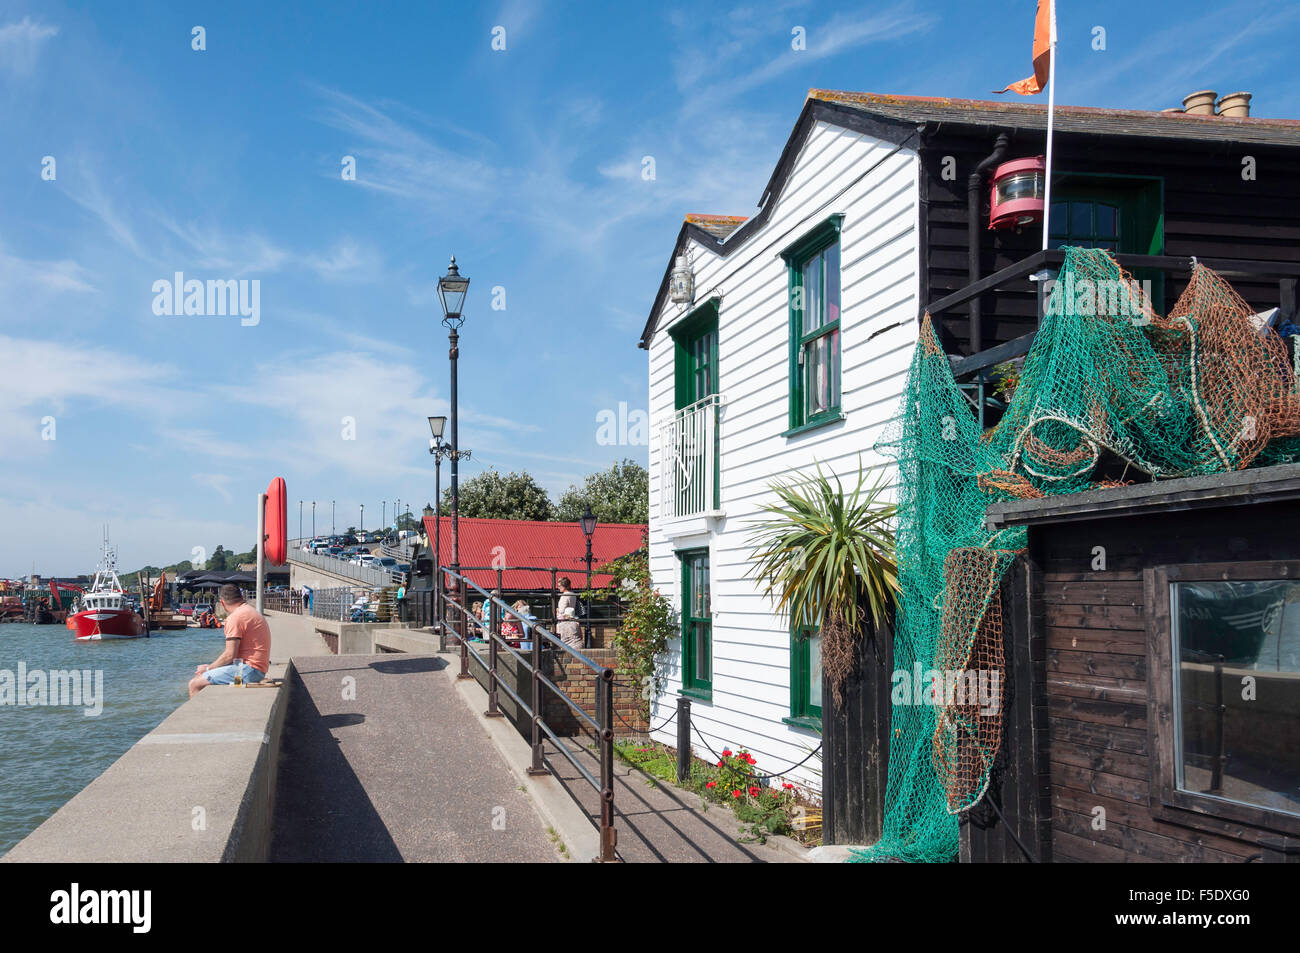 Front de Port, Vieille Leigh, Leigh-on-Sea, Essex, Angleterre, Royaume-Uni Banque D'Images